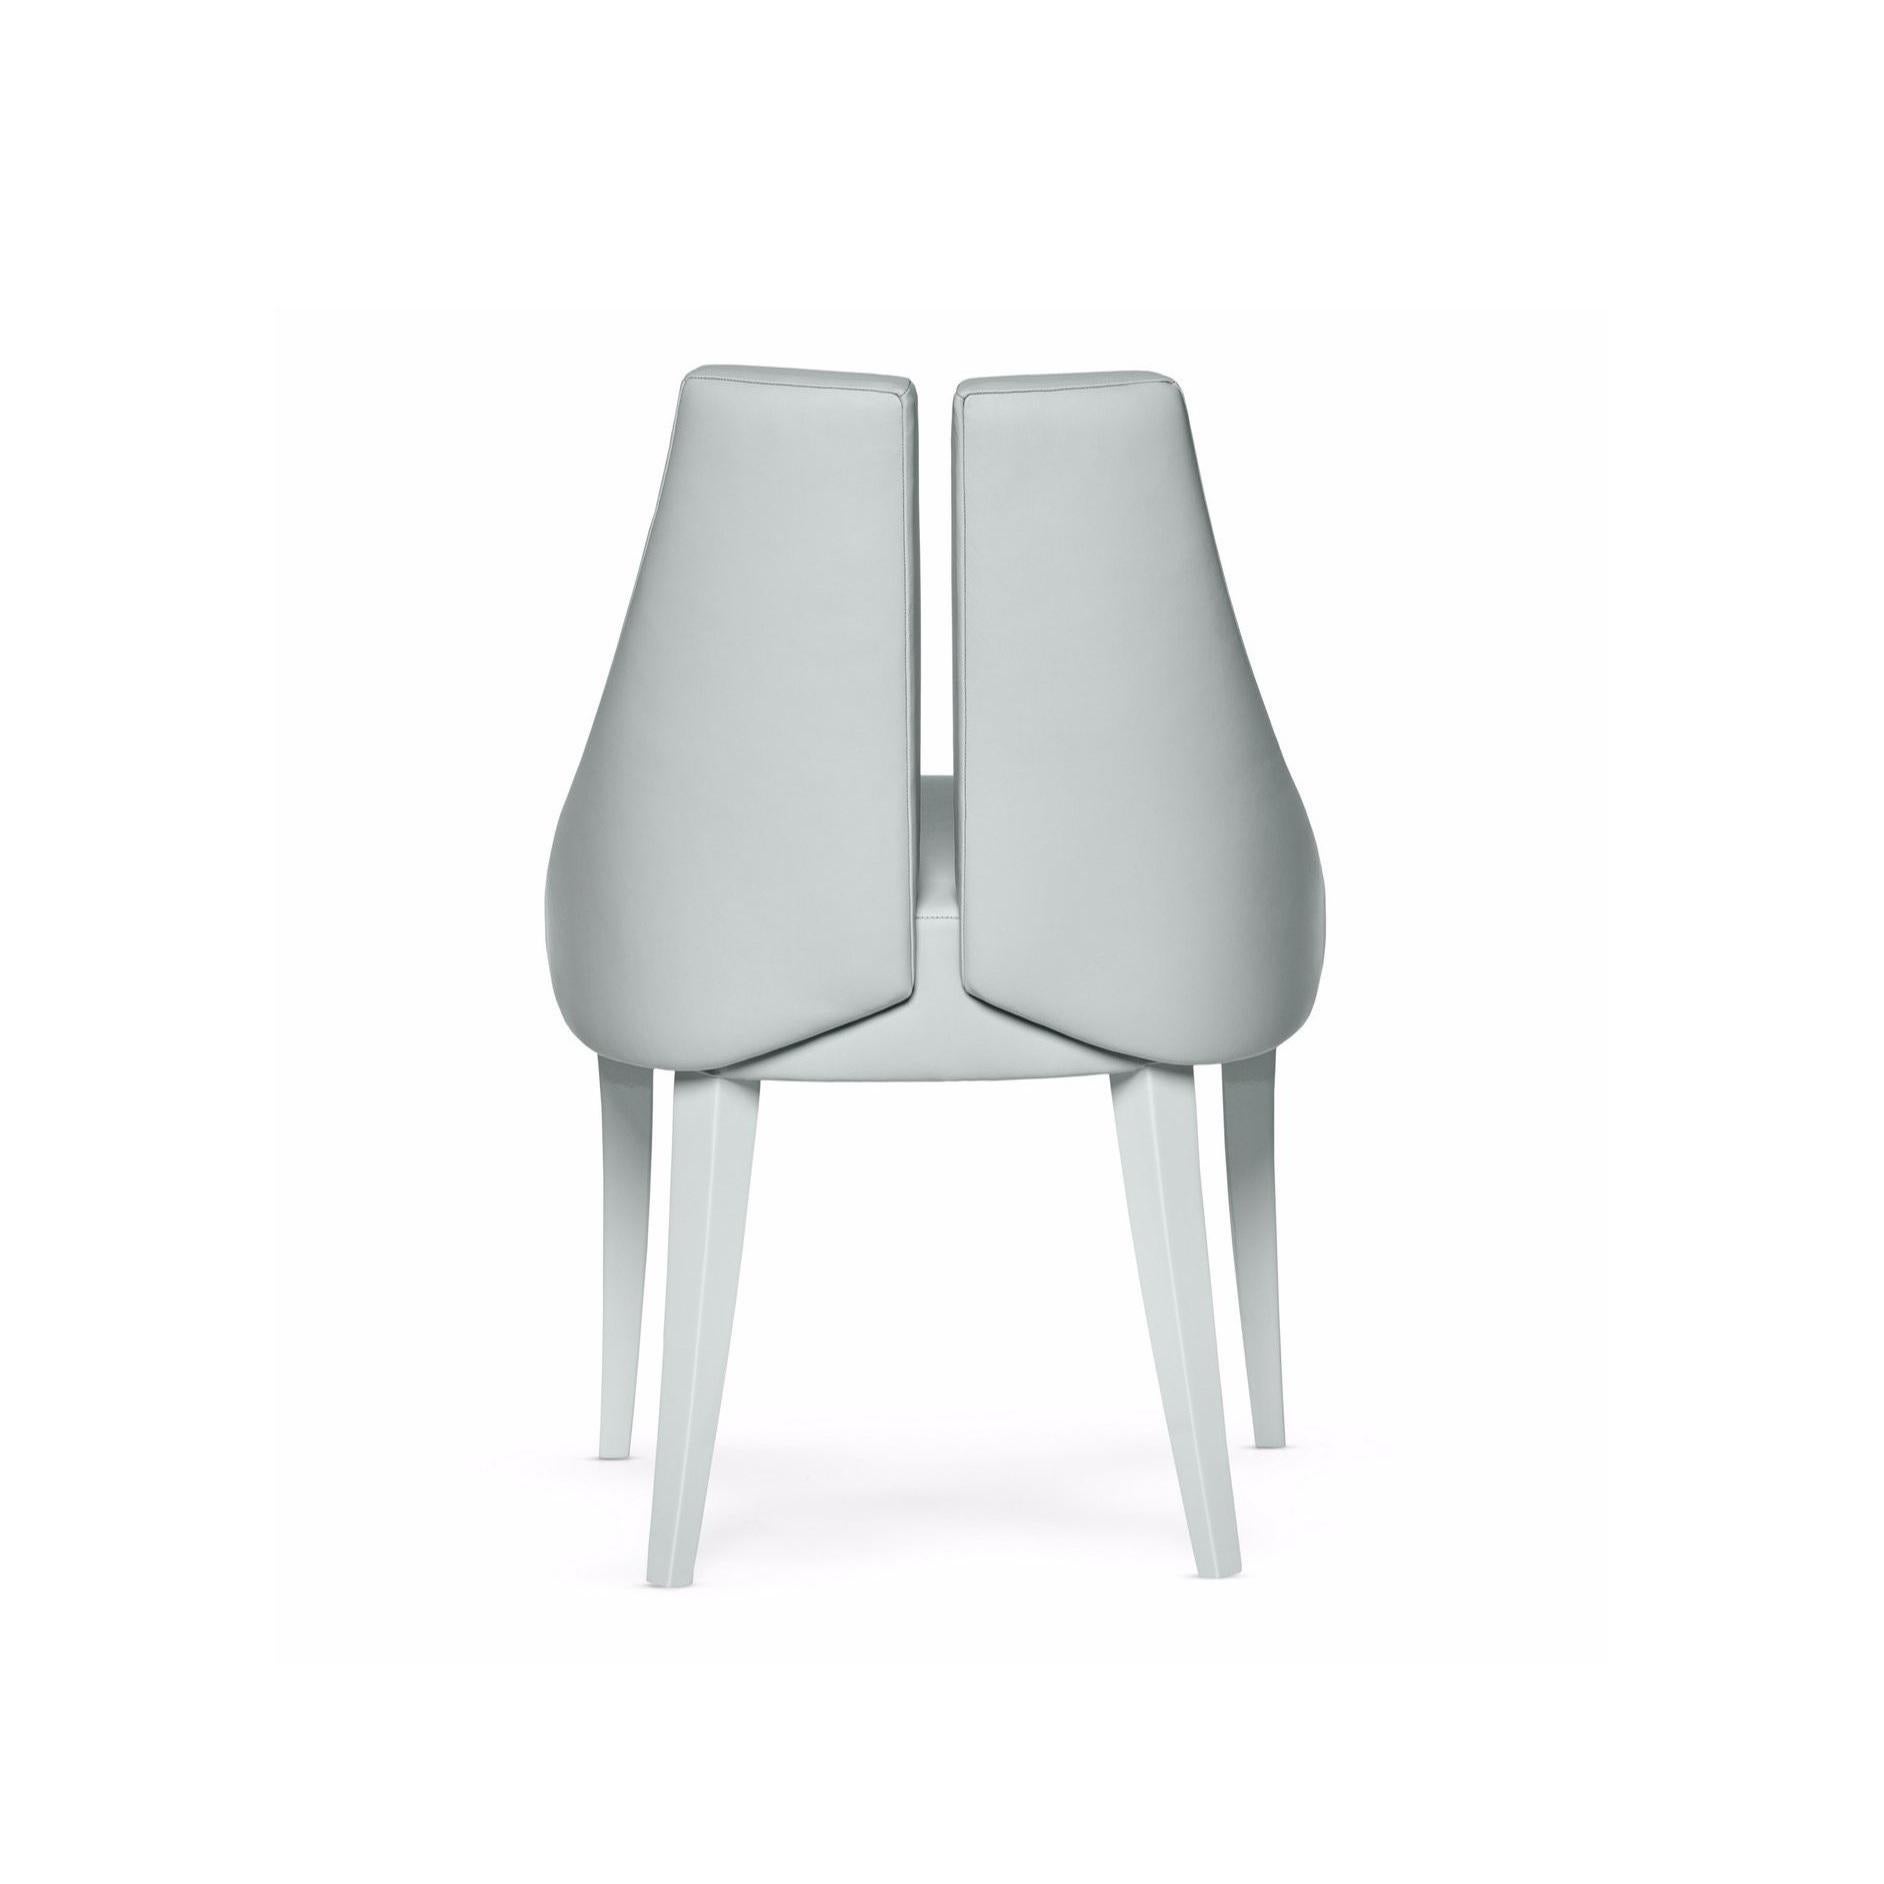 Modern Contemporary Dining Chair w/ Seaming Details For Sale